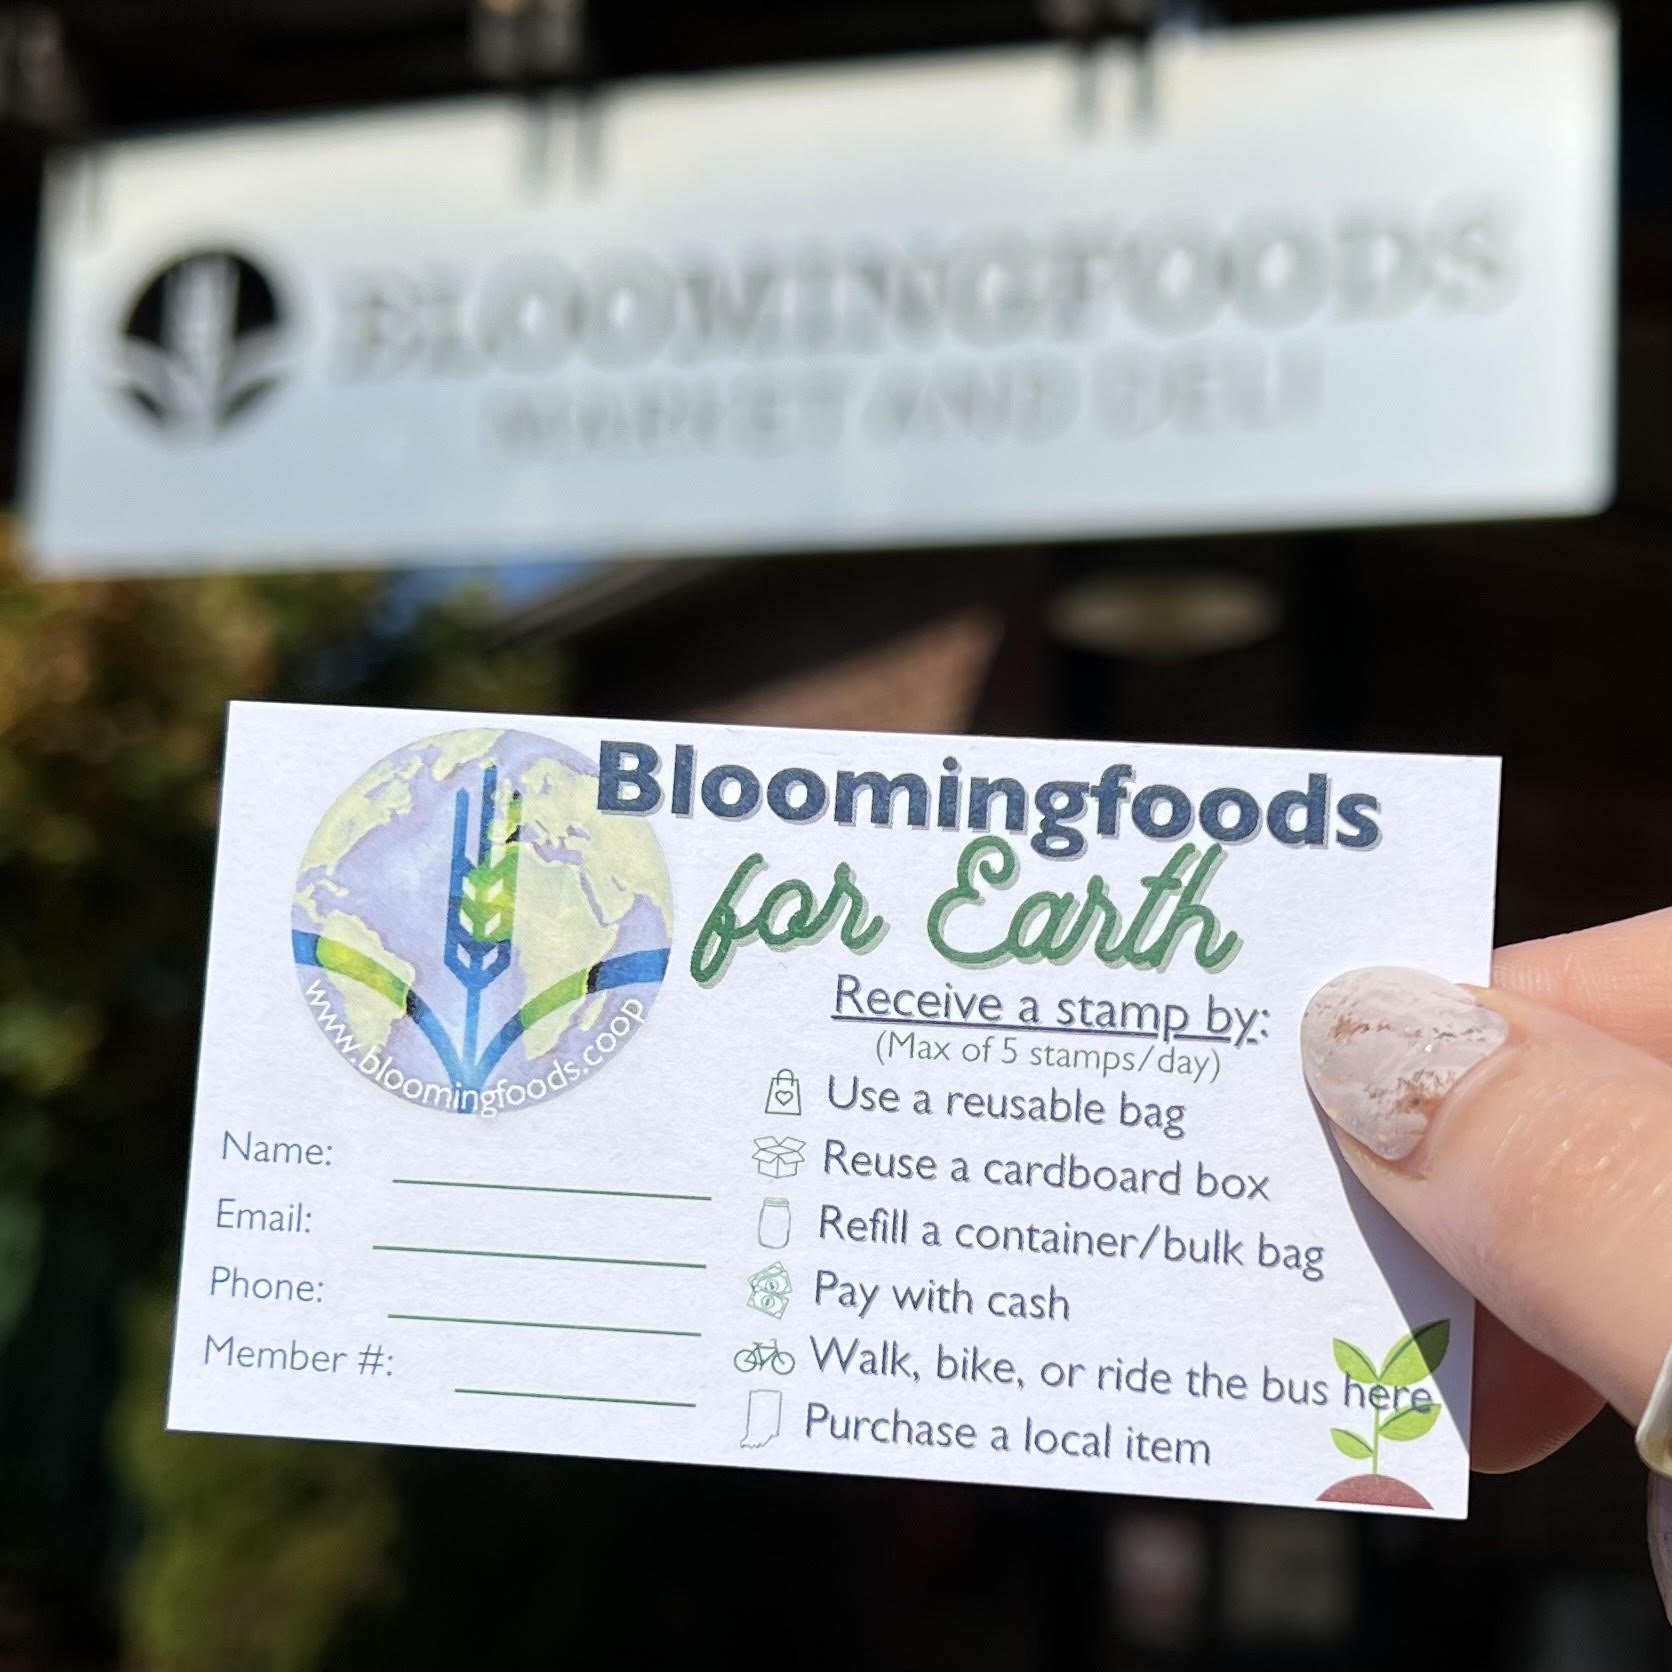 Bloomingfoods for Earth Rewards Cards